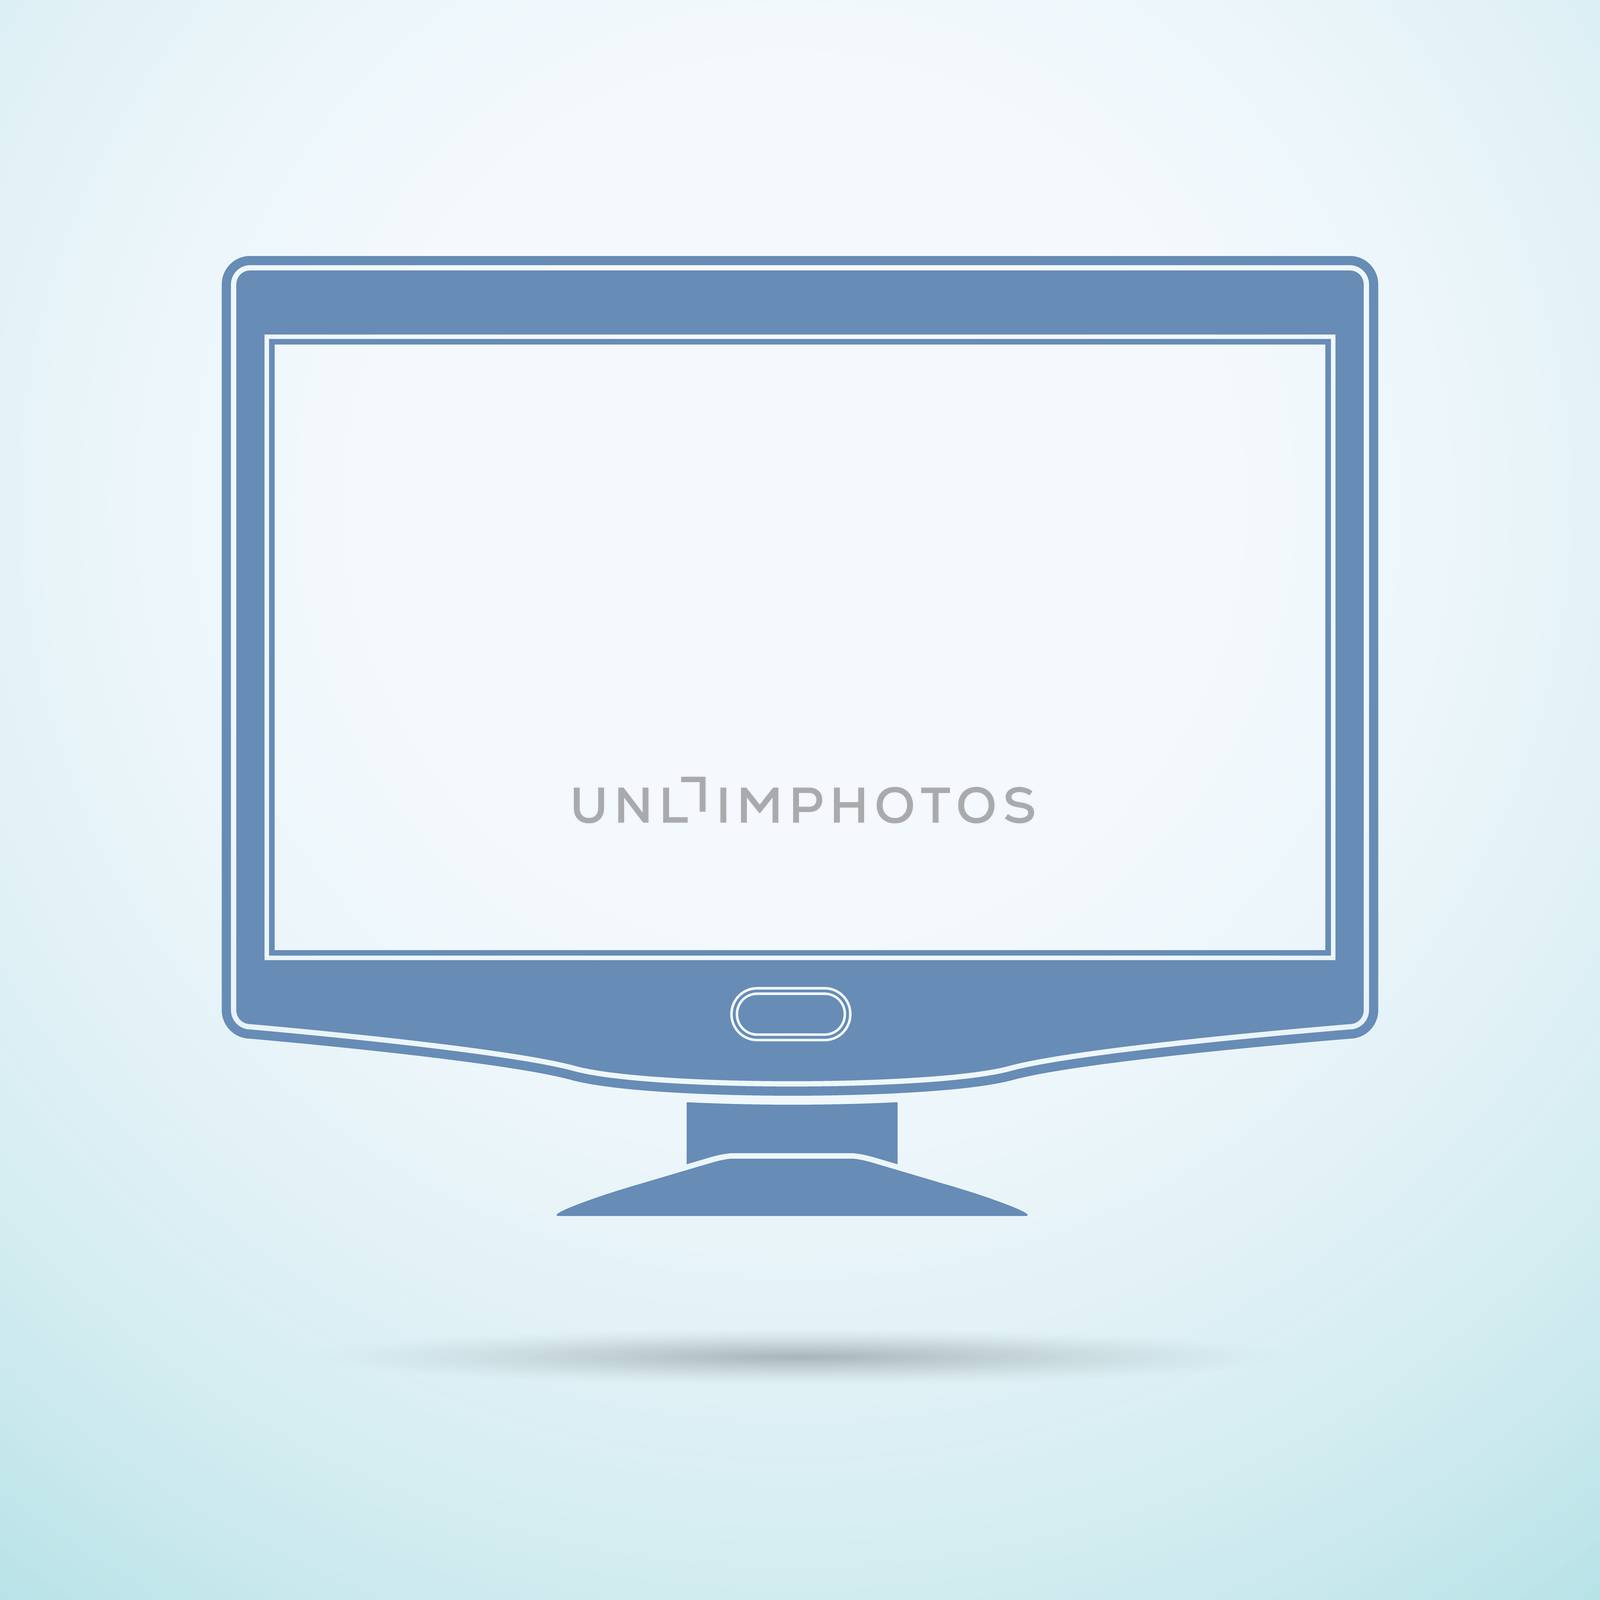 Widescreen monitor flat icon on blue background.